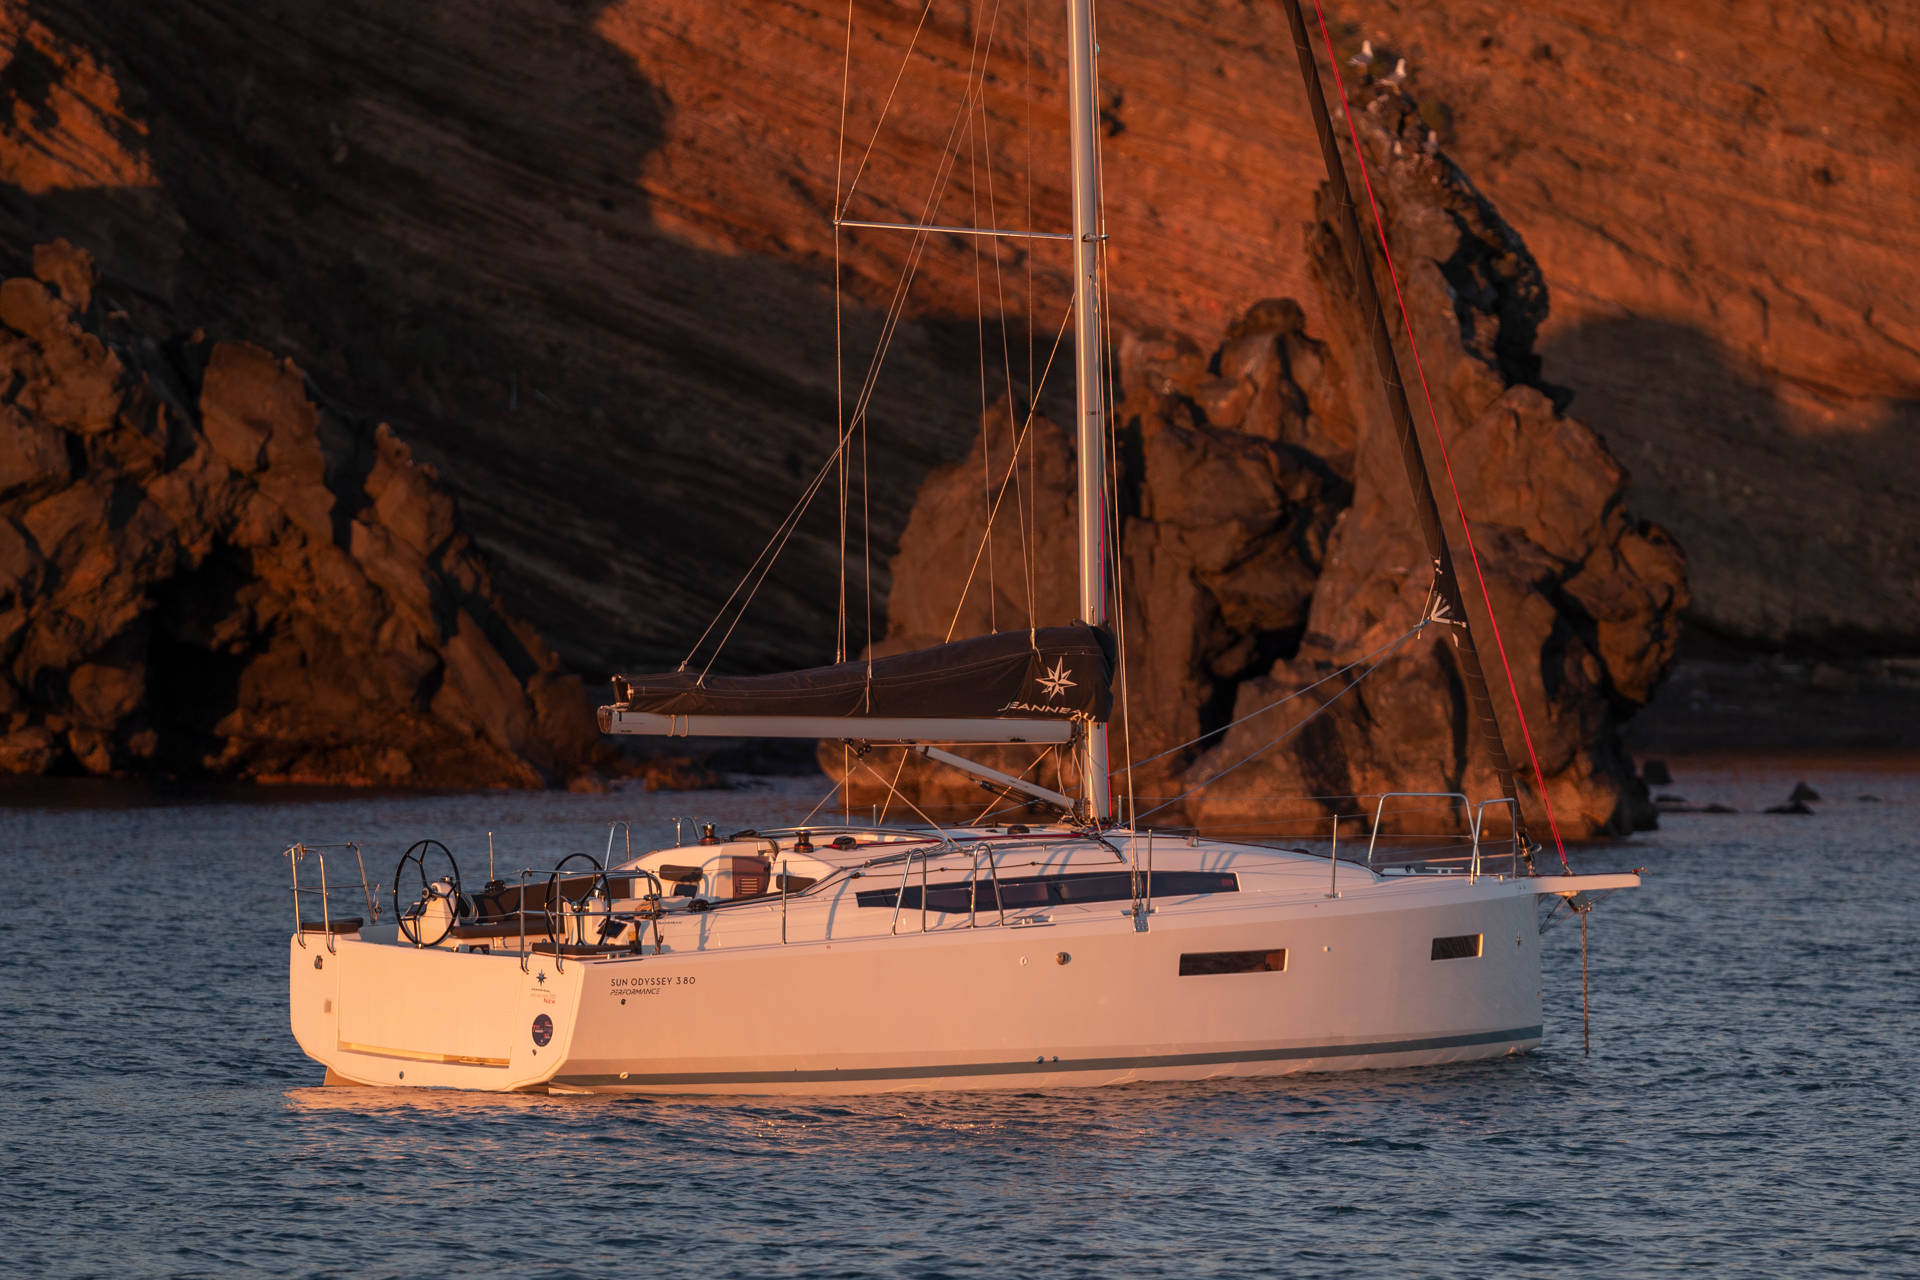 sun-odyssey-380-with-swing-keel-option_61a4f917f22d2